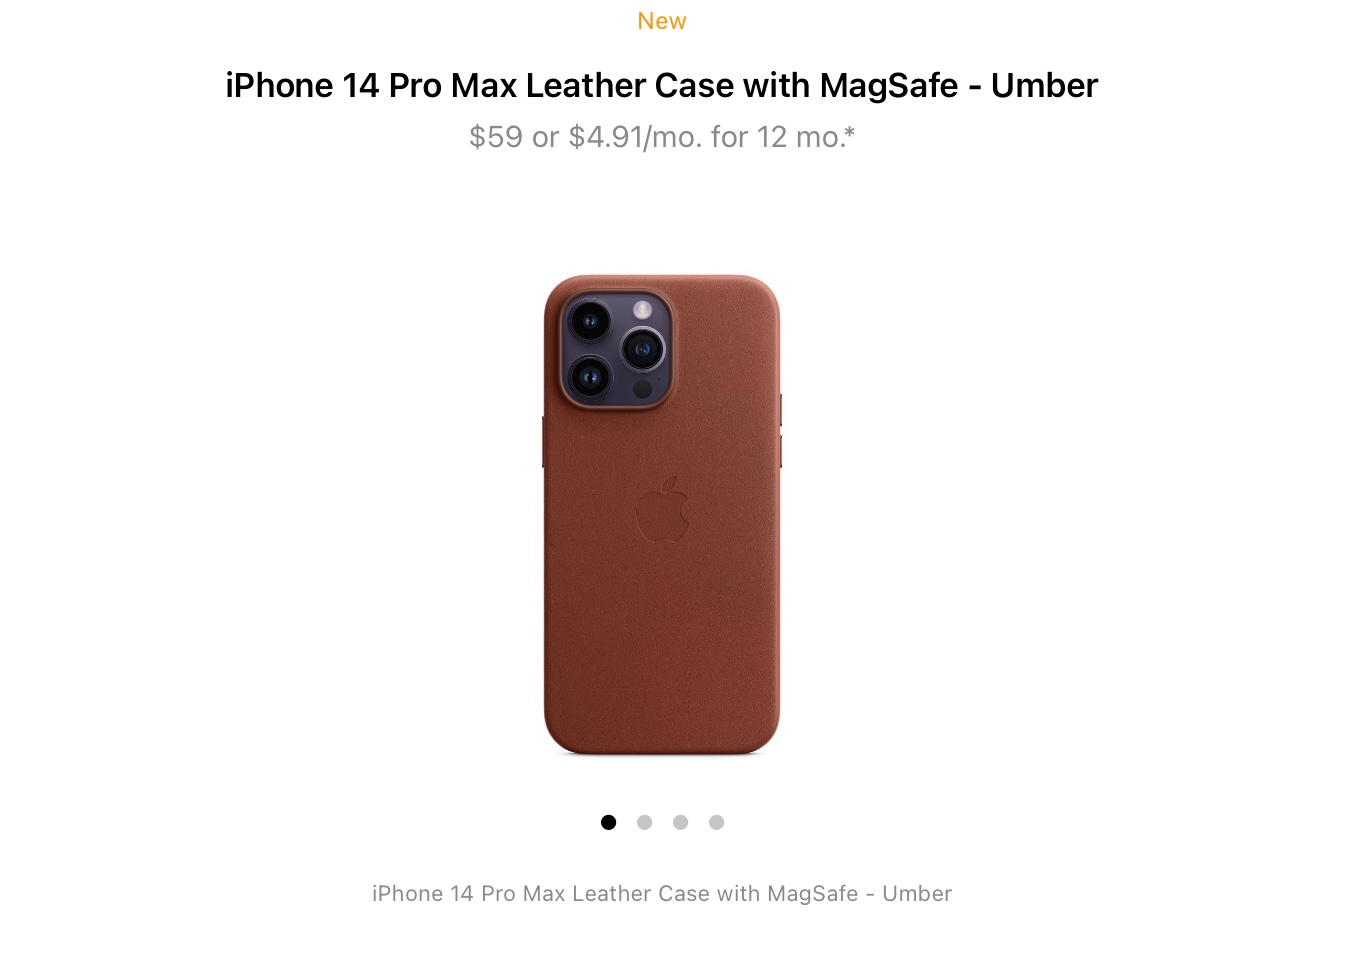  Apple iPhone 14 Pro Max Leather Case with MagSafe